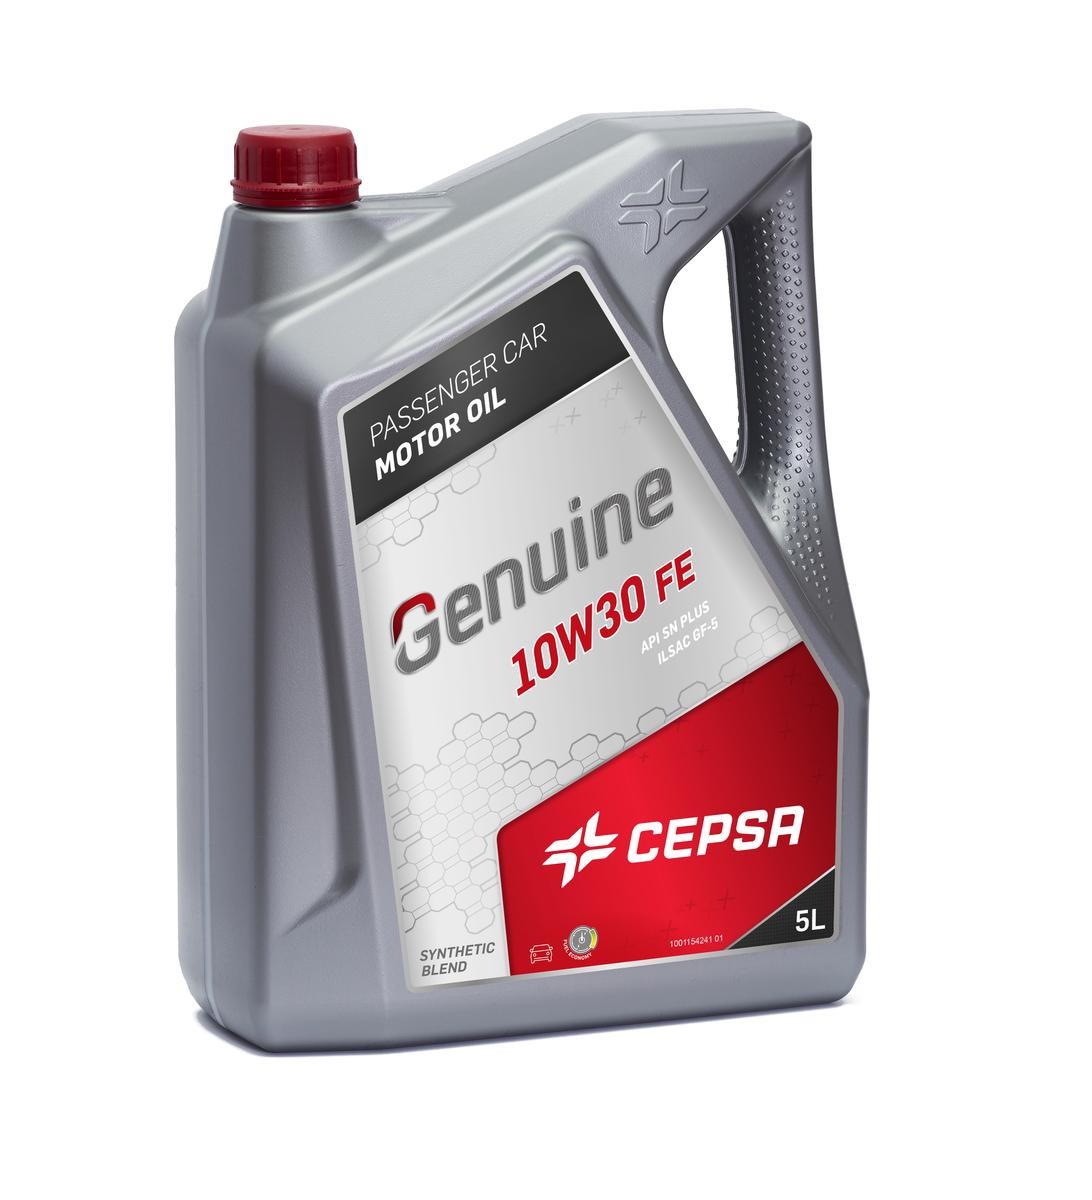 Engine oil CEPSA 10W-30, 5l, Part Synthetic Oil, Part Synthetic Oil longlife 513703090